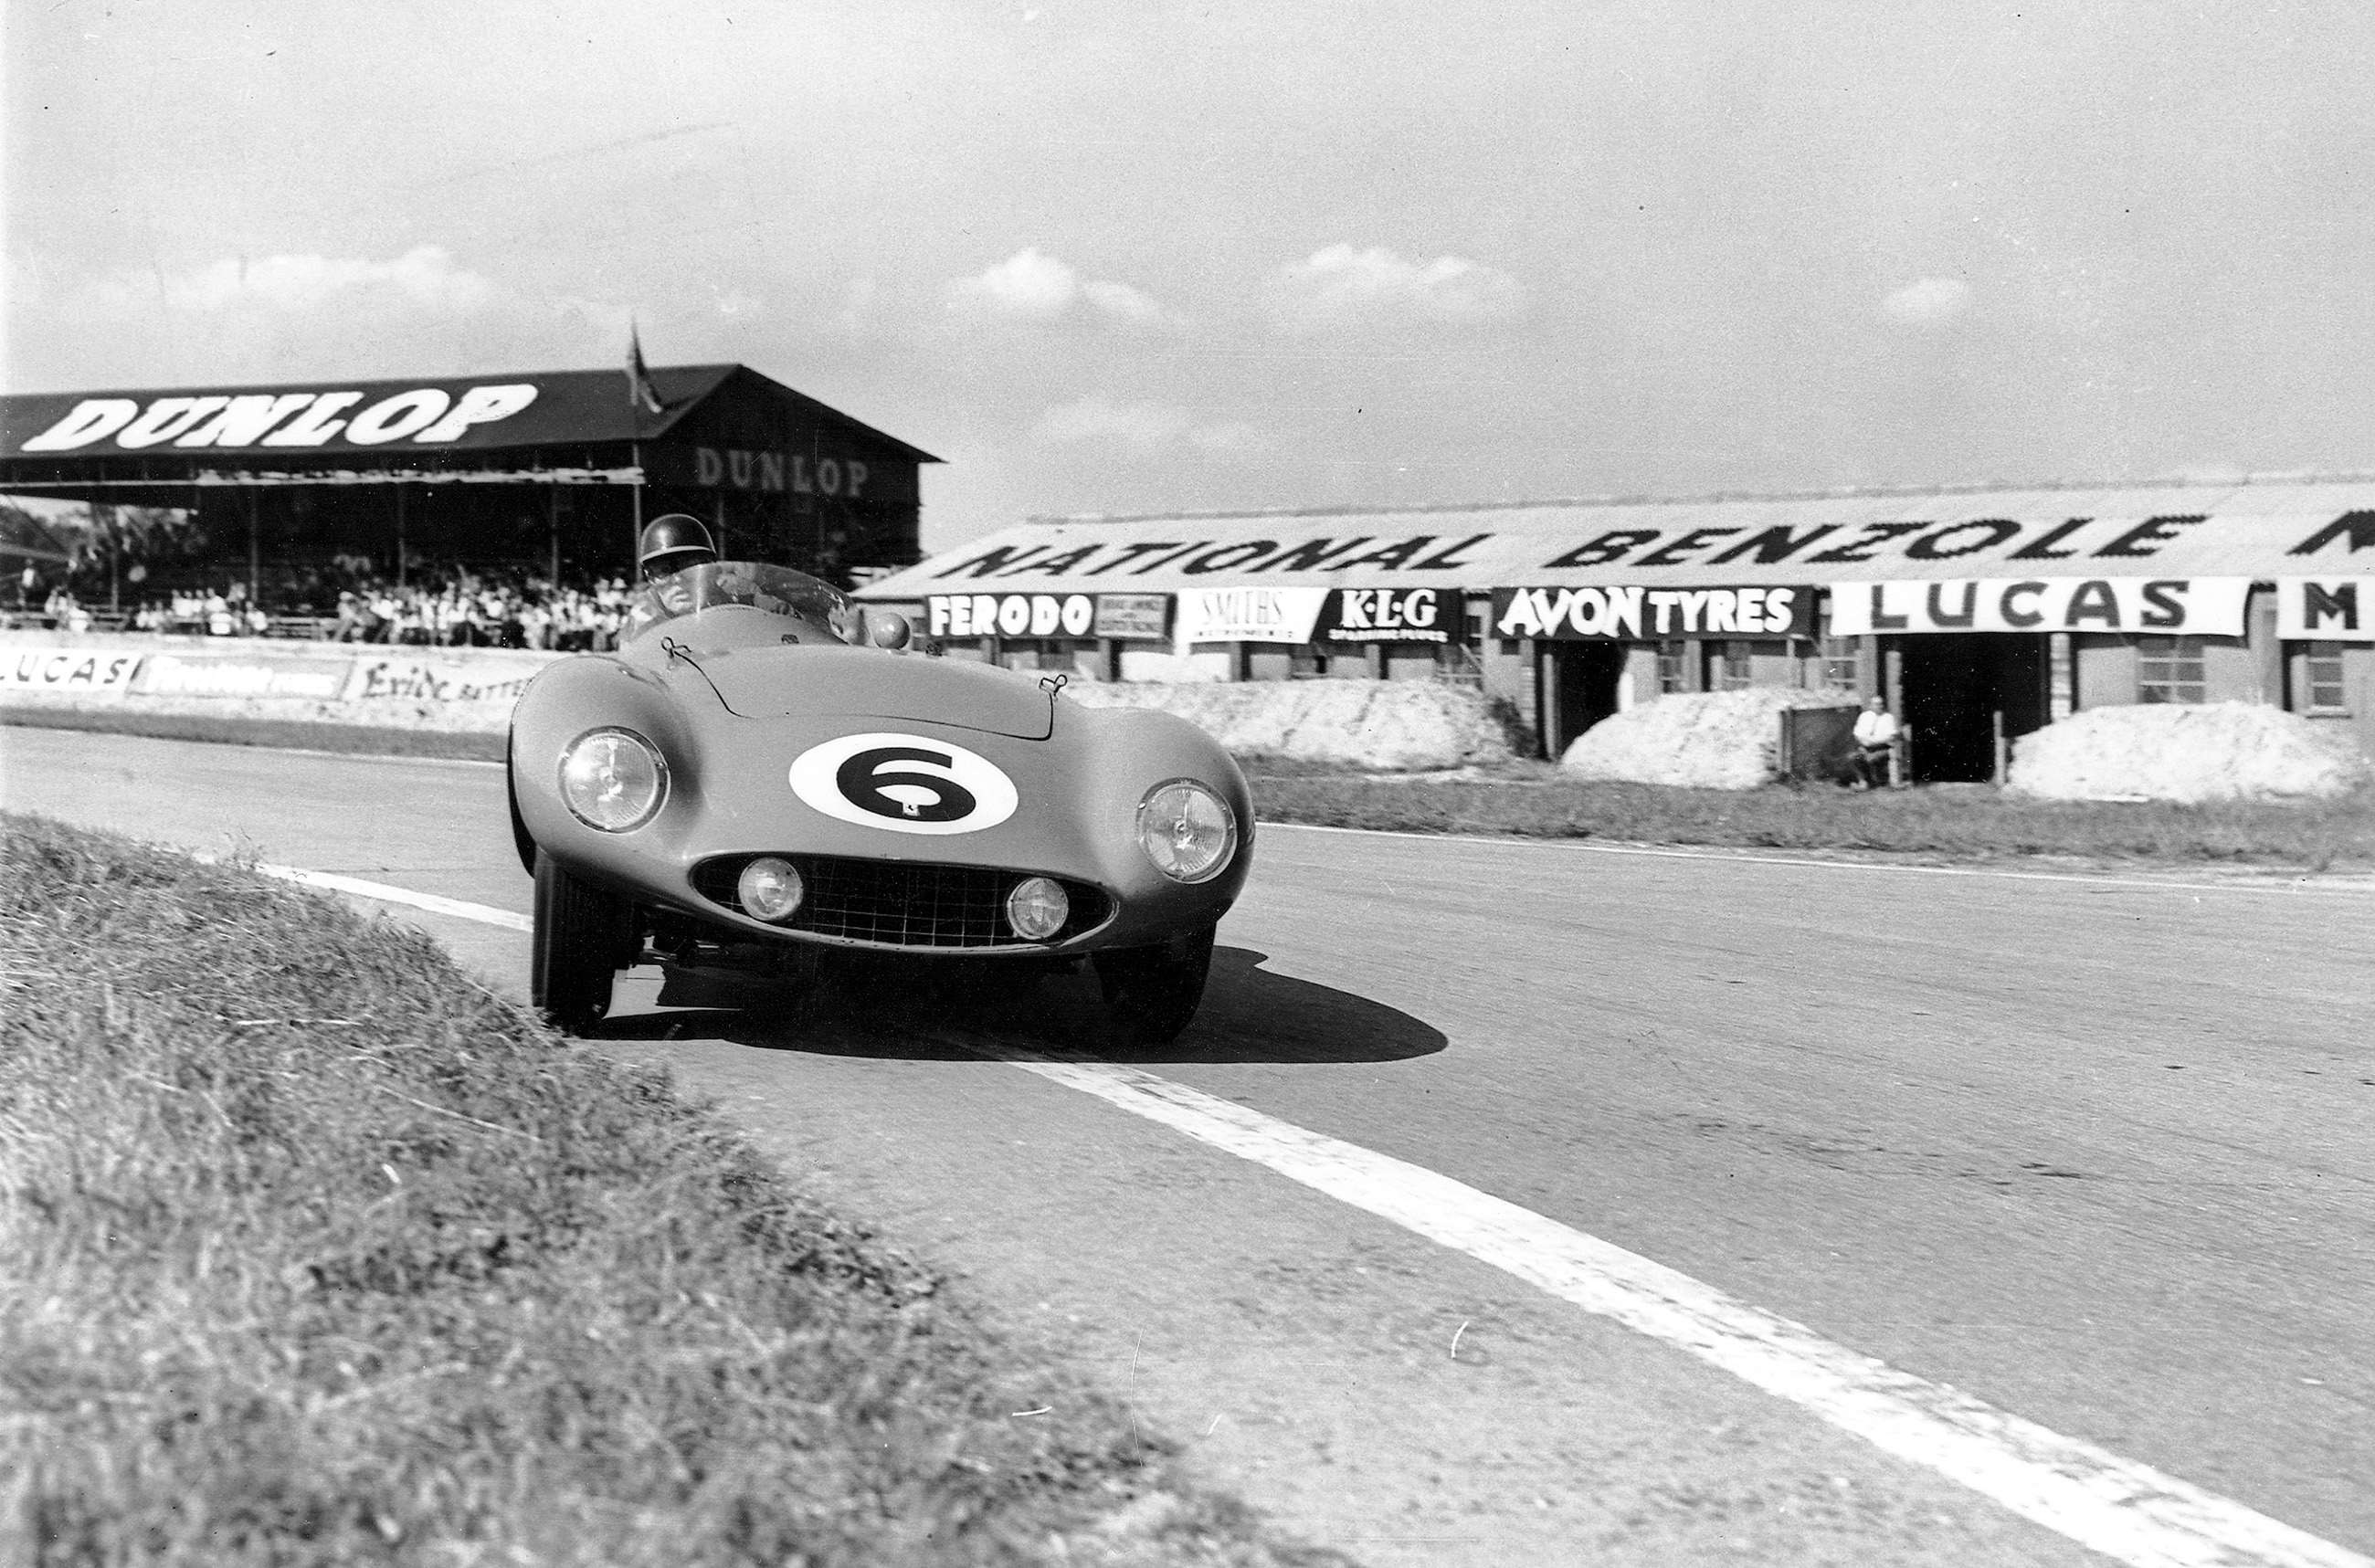 Mike Hawthorn setting the Goodwood sportscar lap record in his works Ferrari 750 Monza, 1955